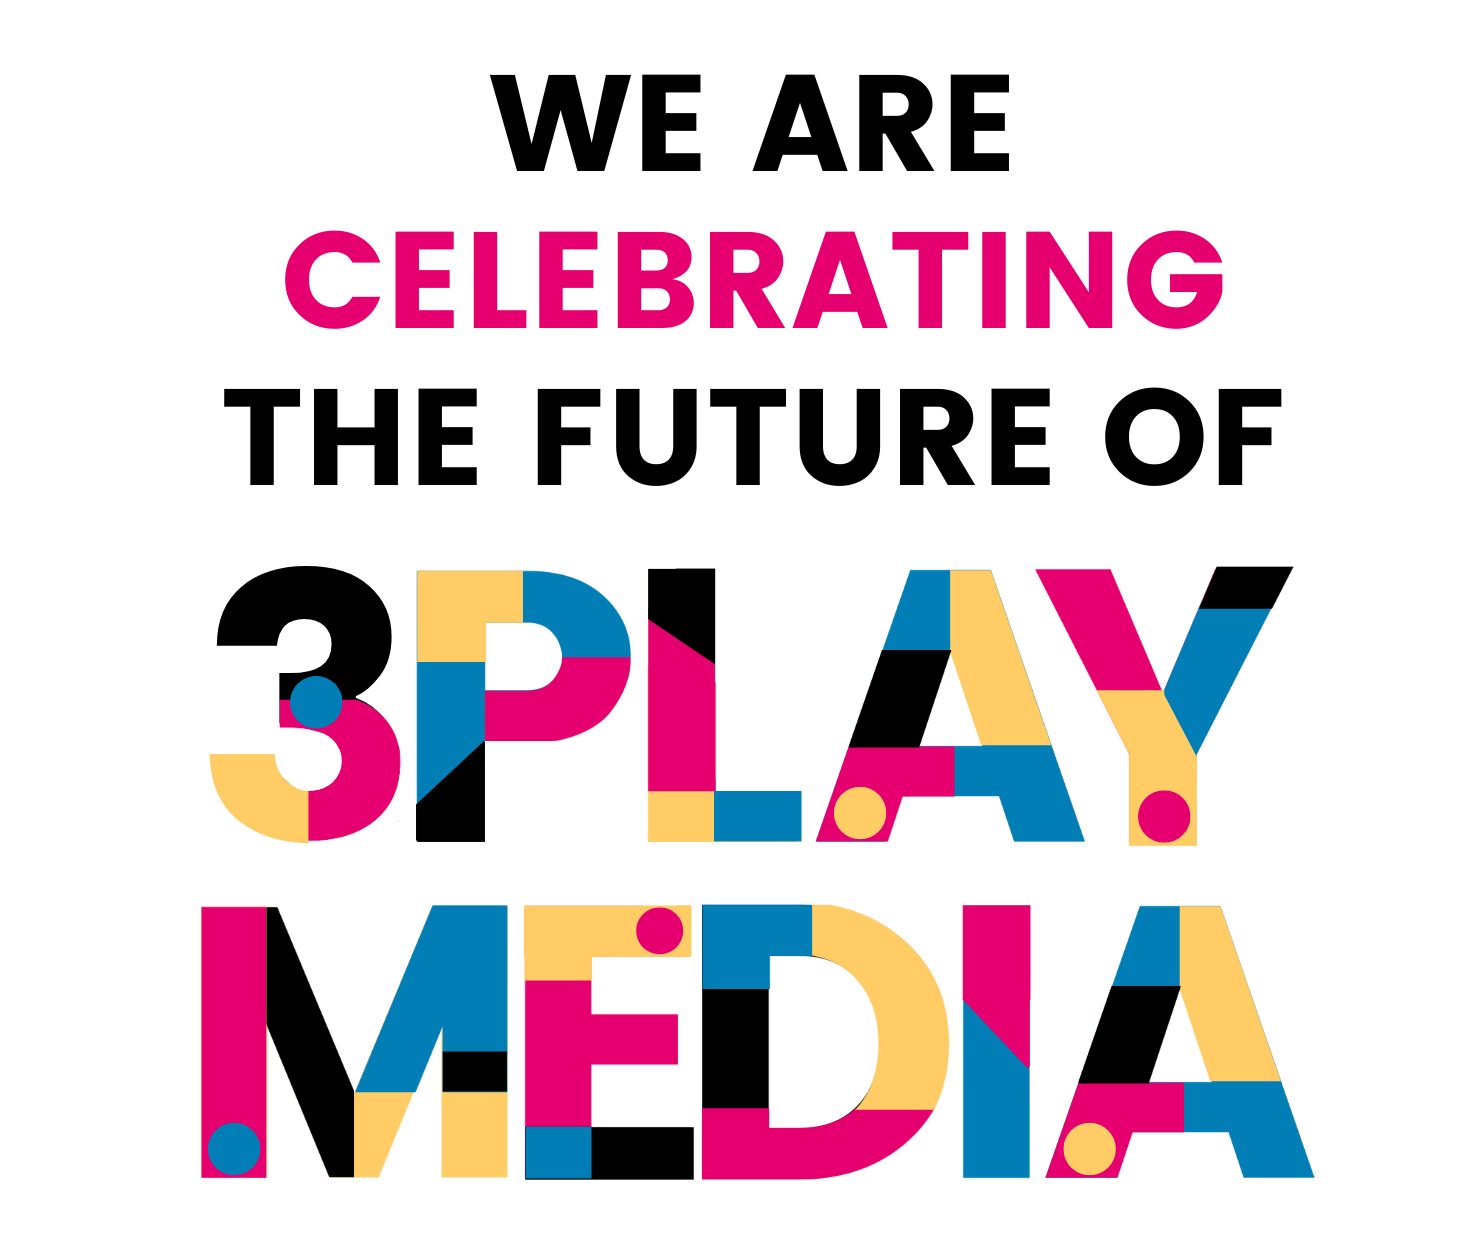 We are celebrating the future of 3Play Media on September 29, 2022